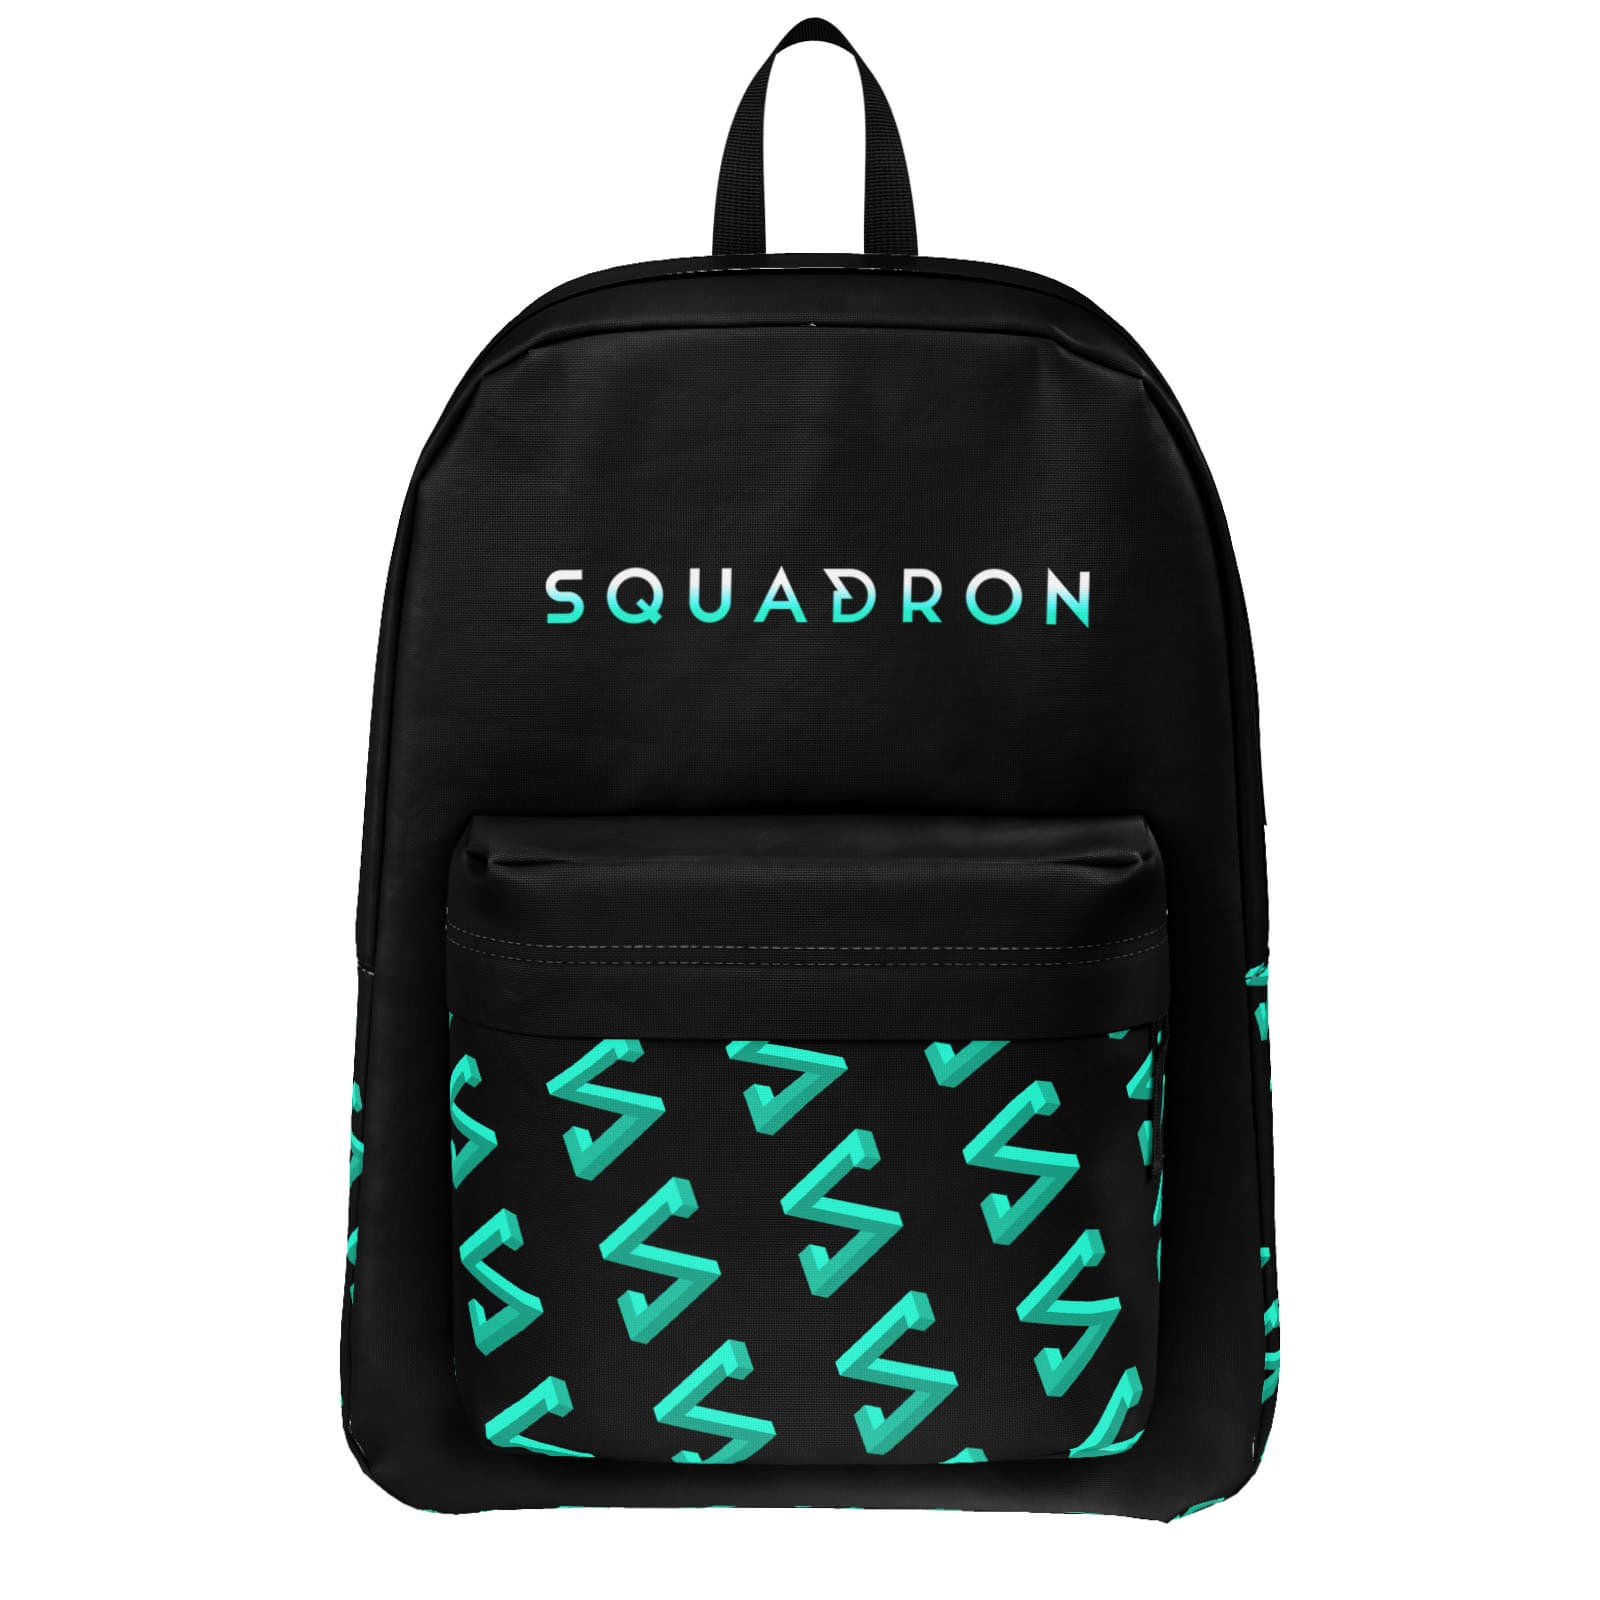 Customize Fashion Printed Color Life Laptop school bags